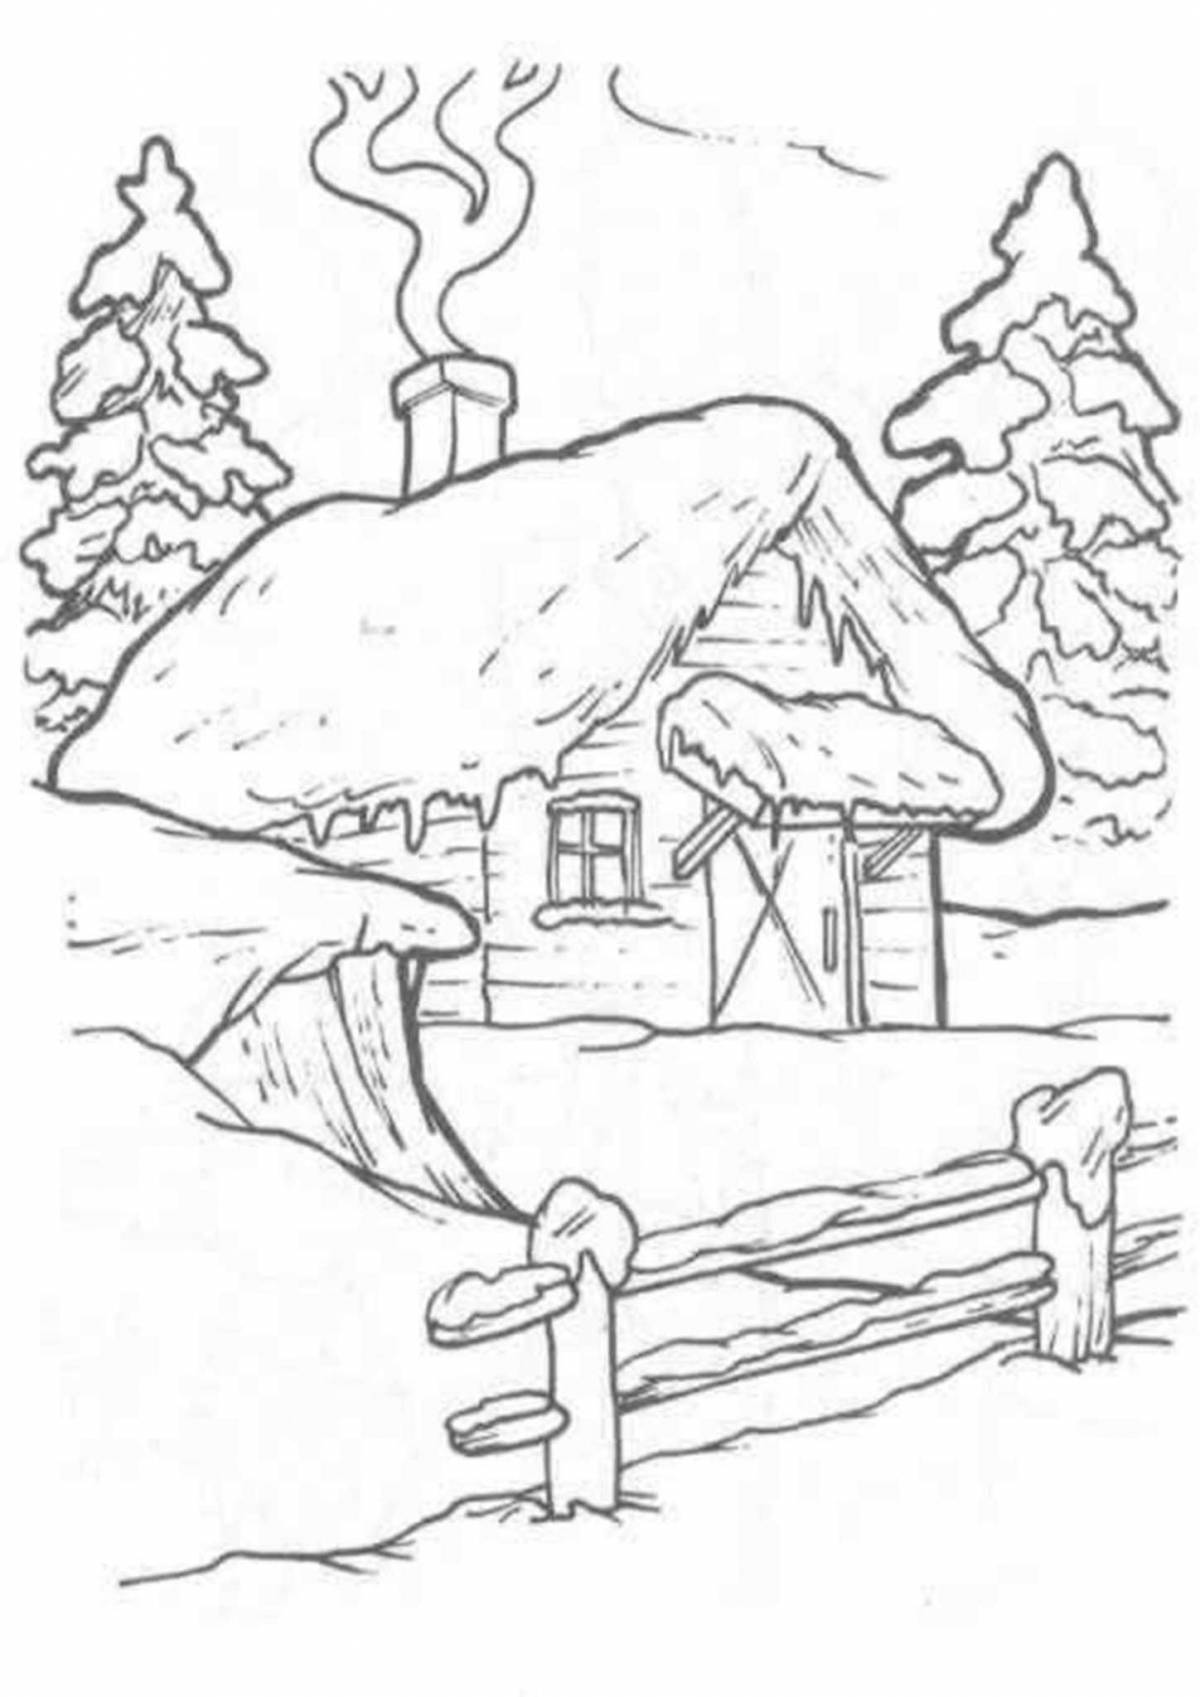 Refreshing winter village coloring page